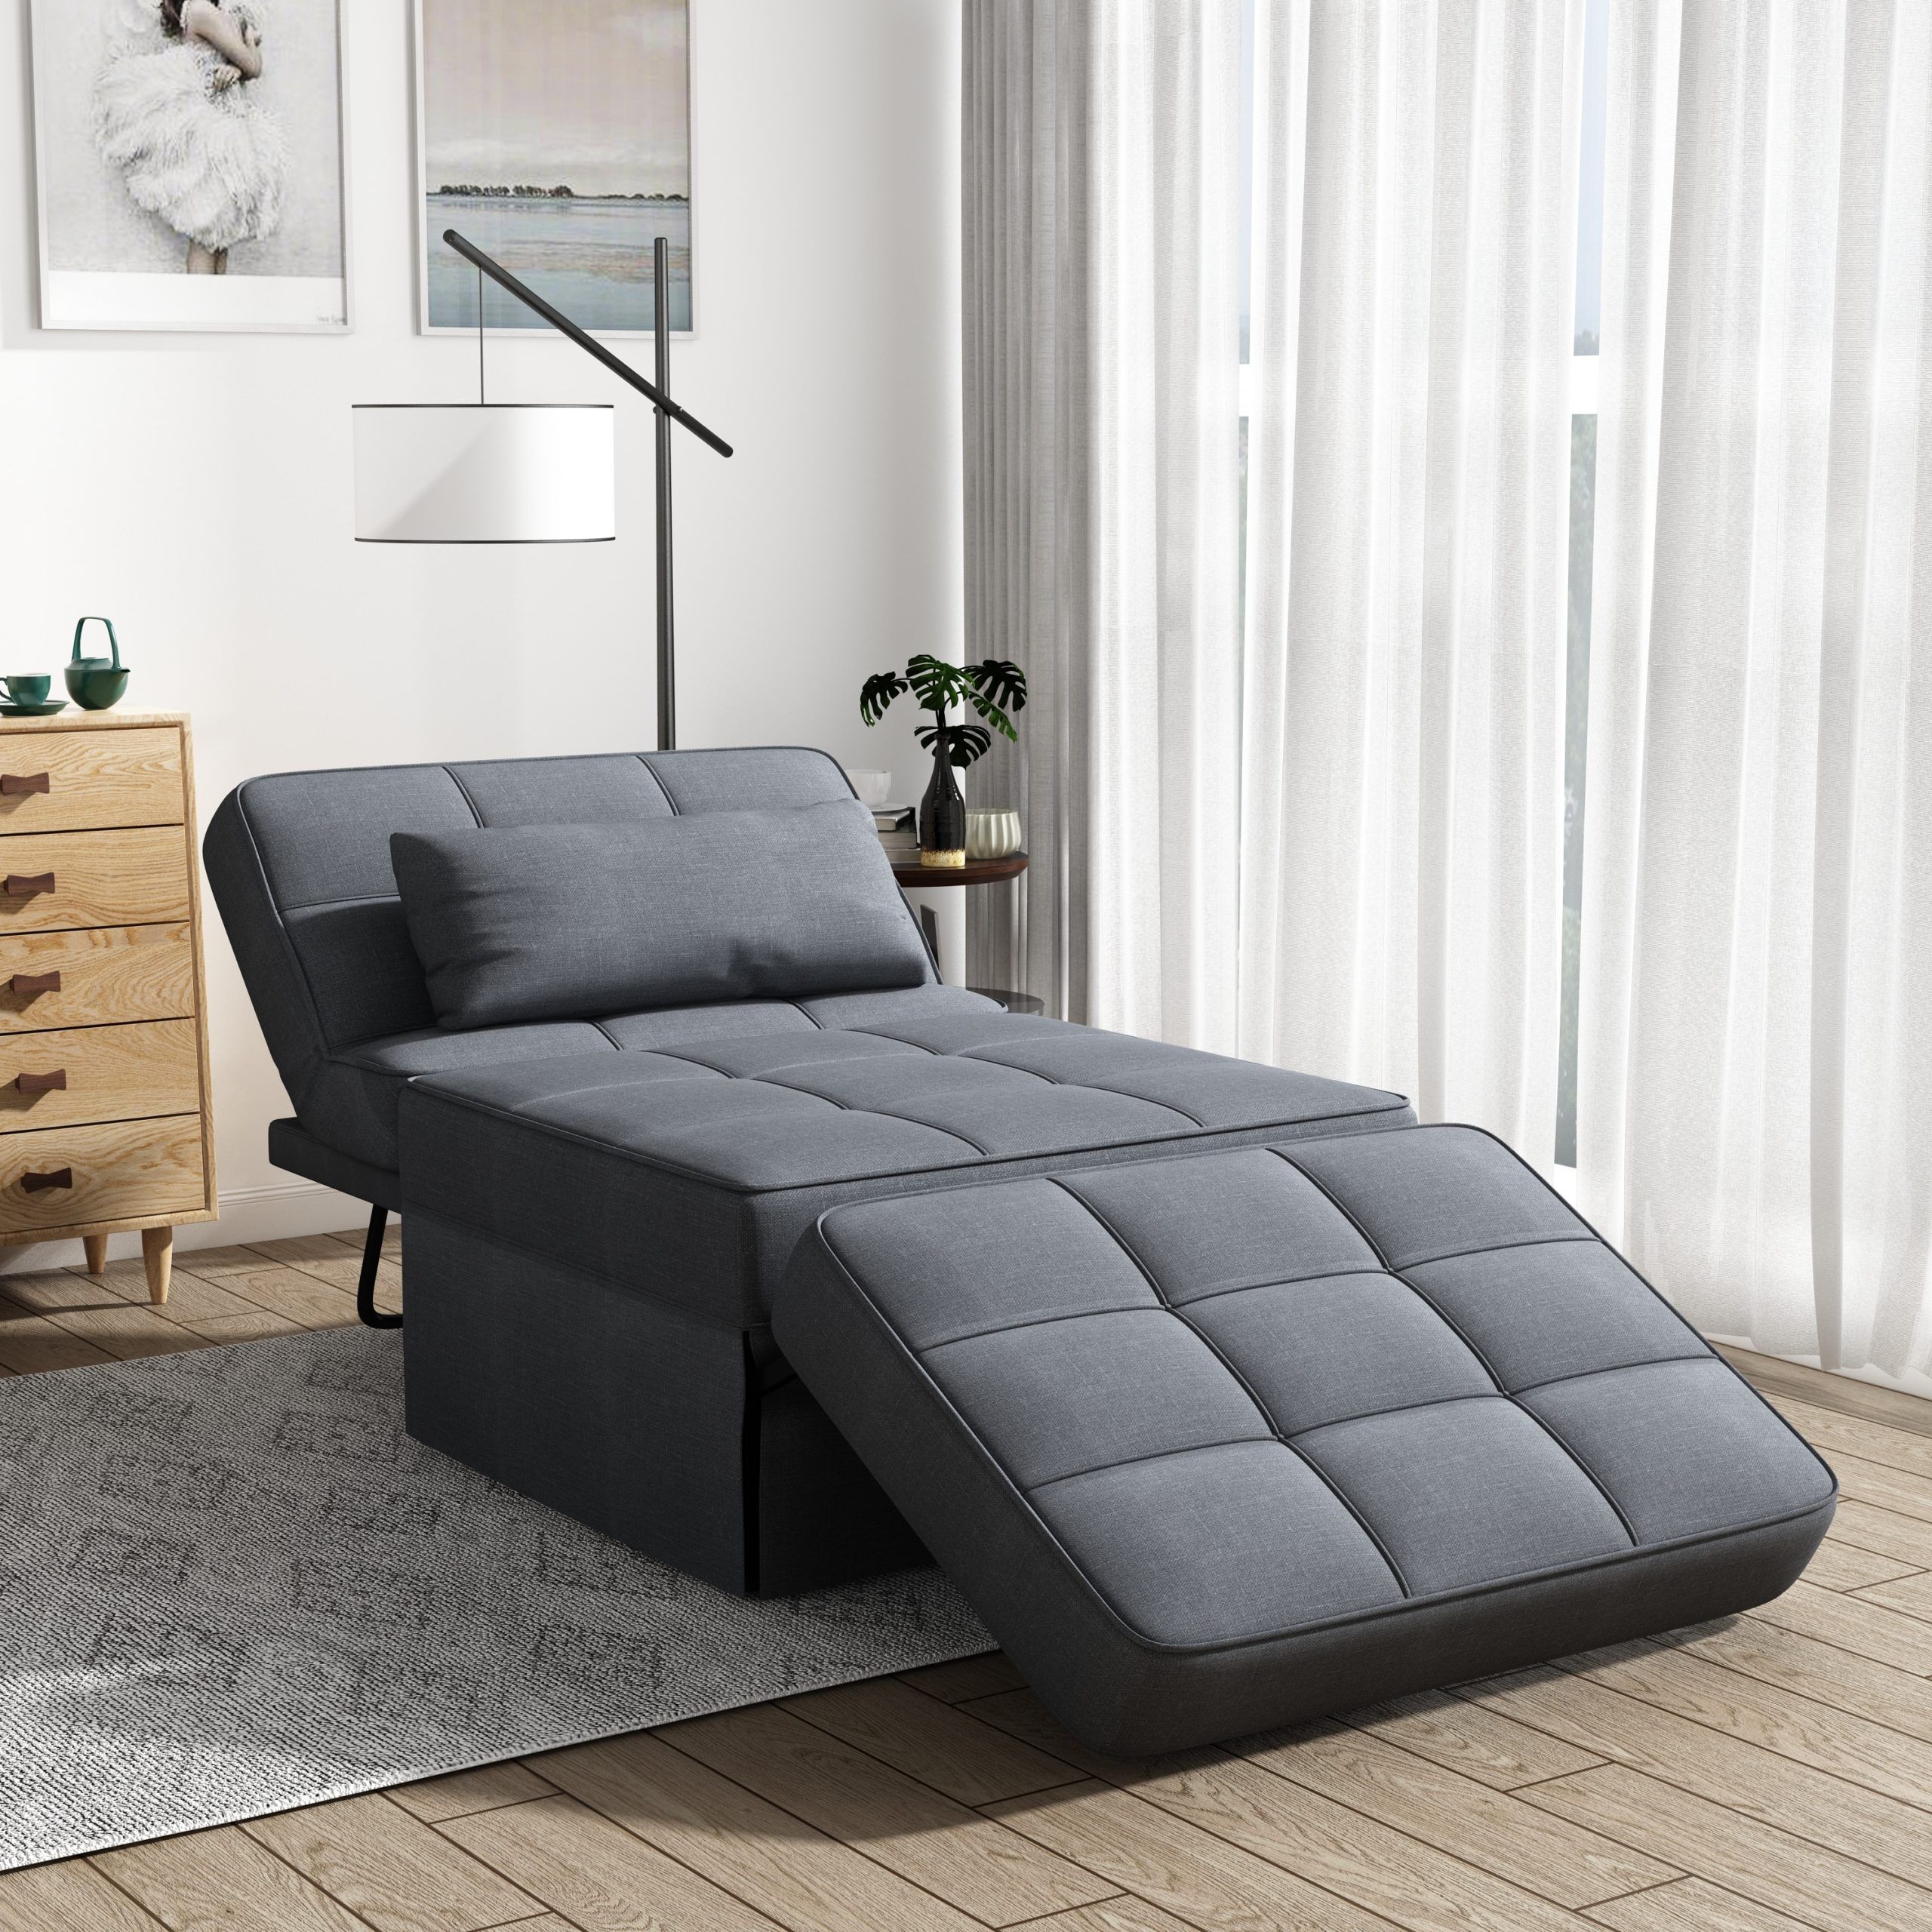 Sofa Bed, 4 In 1 Multi Function Folding Ottoman Breathable Linen Couch Bed  With Adjustable Backrest Modern Convertible Chair – On Sale – Bed Bath &  Beyond – 36687063 Regarding 4 In 1 Convertible Sleeper Chair Beds (View 9 of 15)